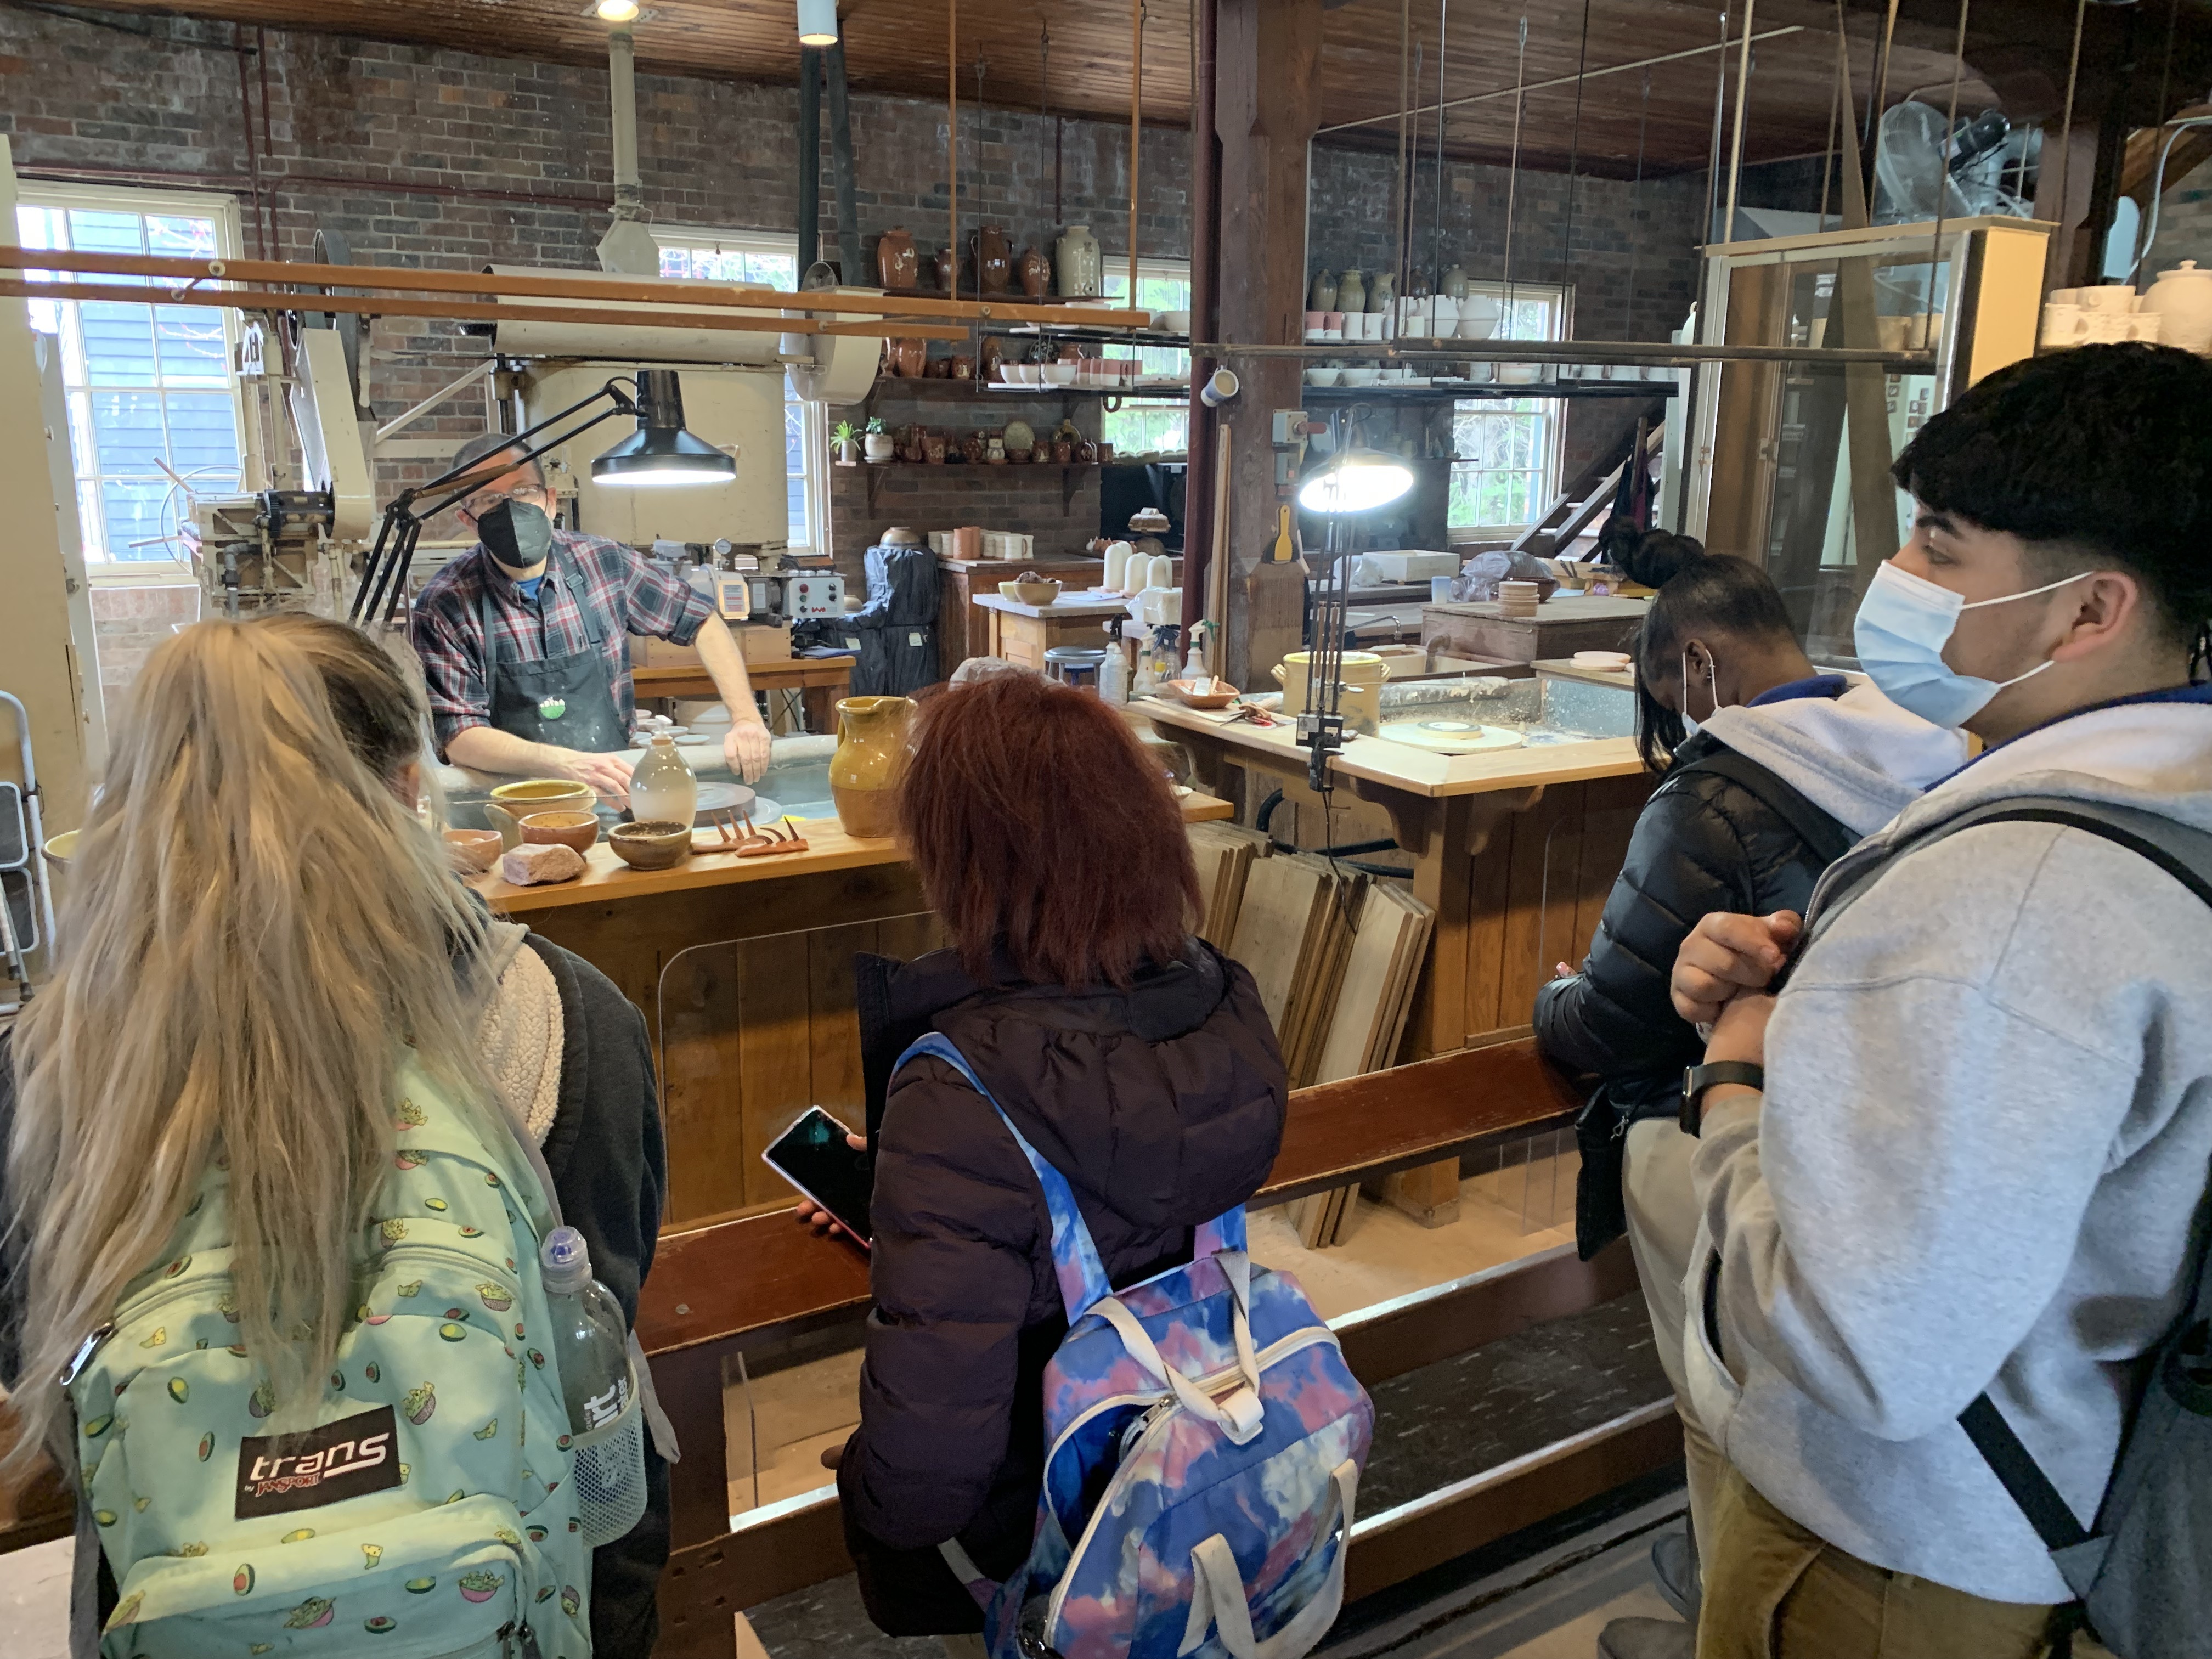 Mr. Koslowski's Village History Class Viewing a Presentation within the Ceramics Shop of the Greenfield Village.